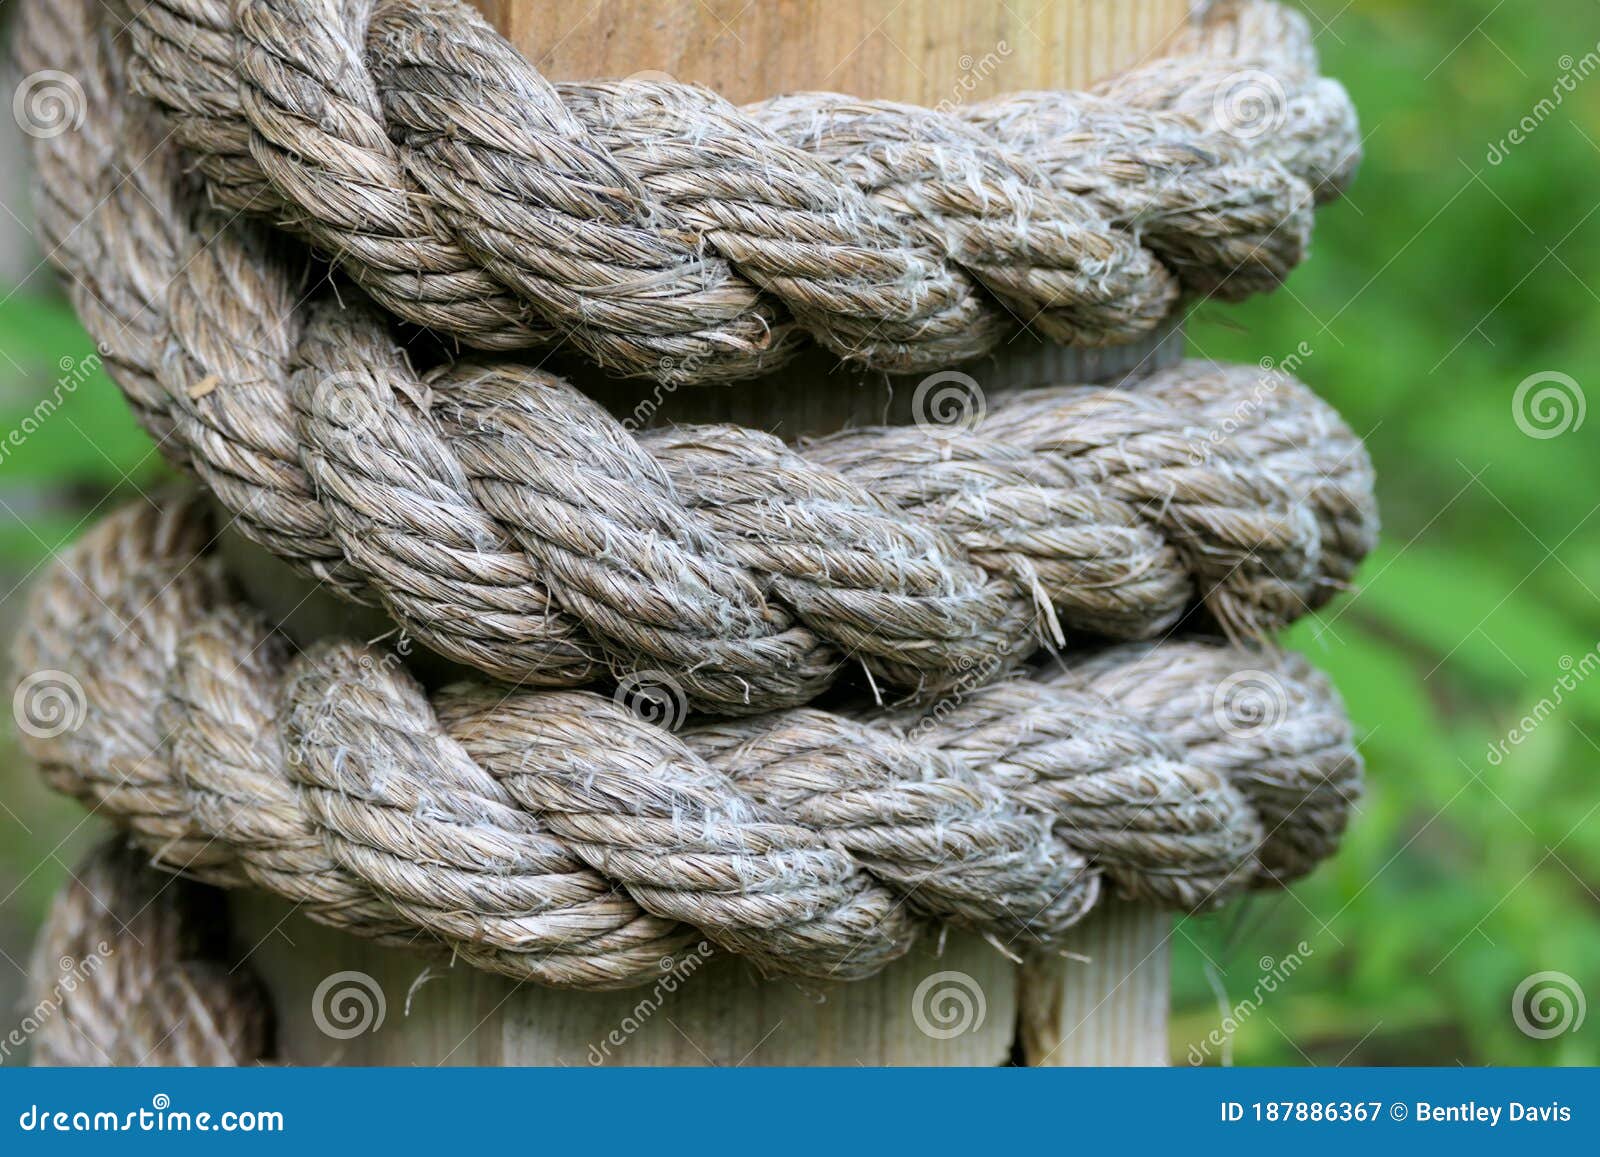 Thick Twine Rope Wrapped Around a Wooden Post Stock Image - Image